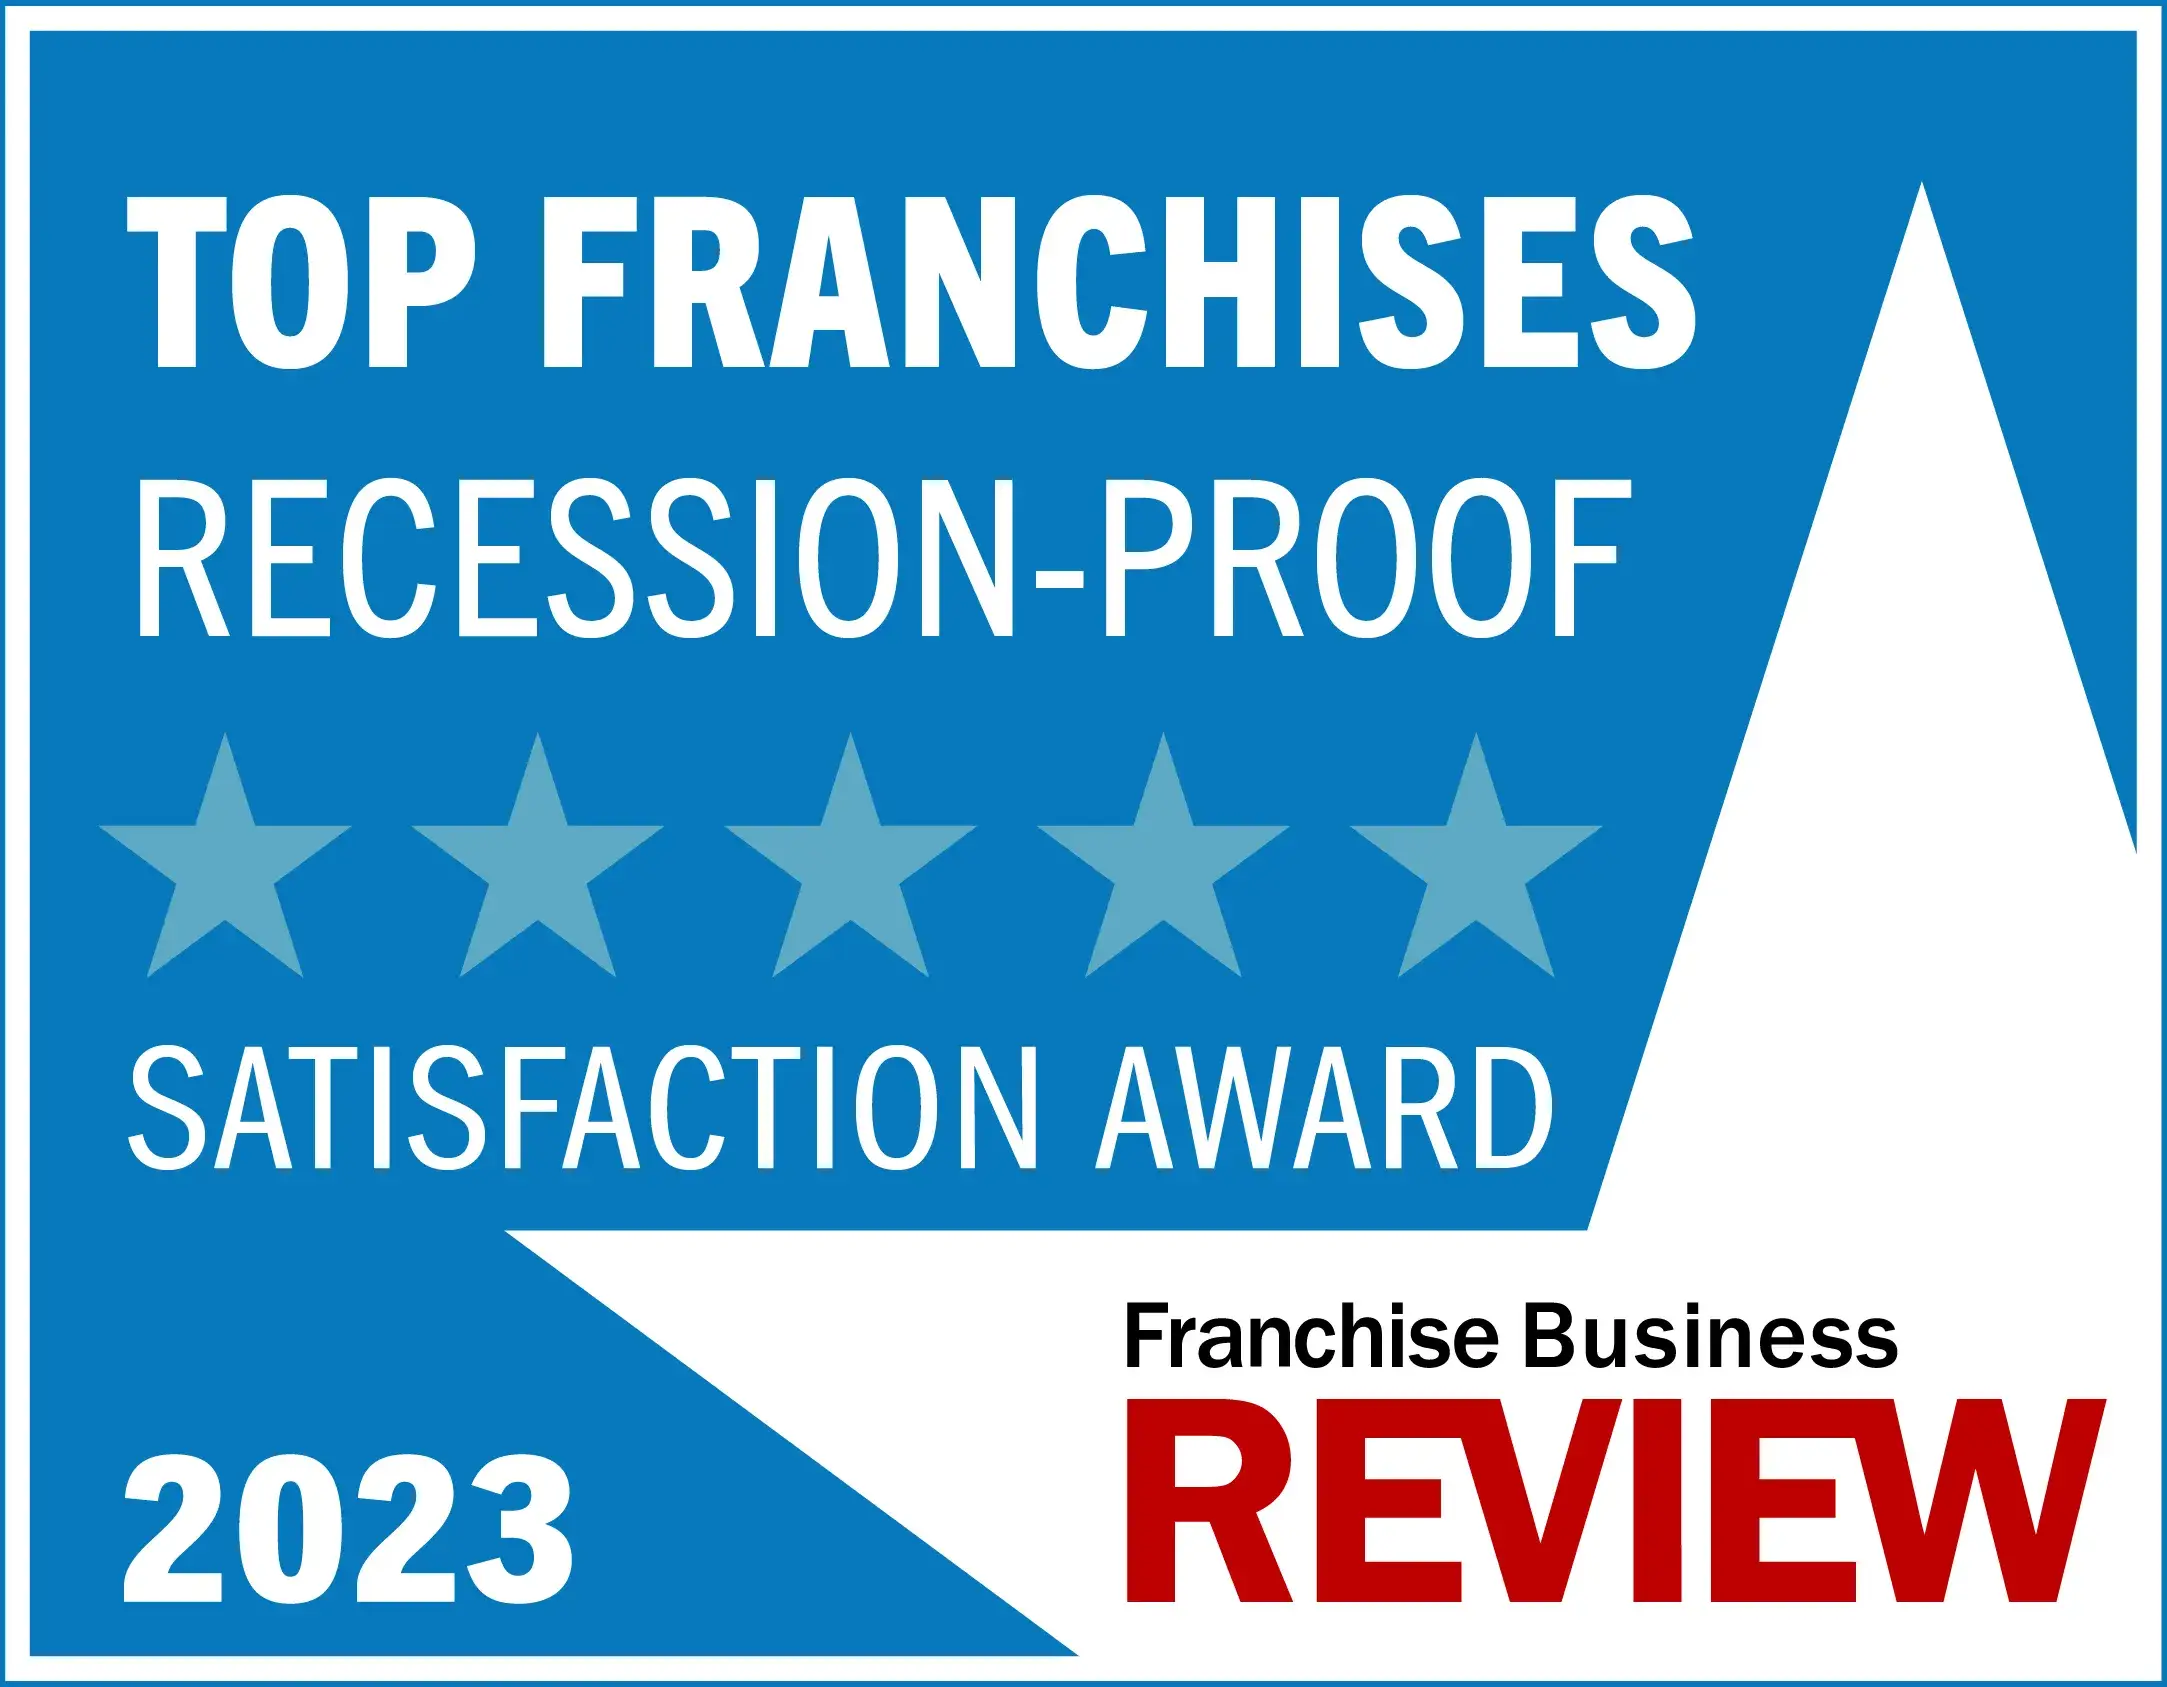 Franchise Business Review Recession Proof - 2023